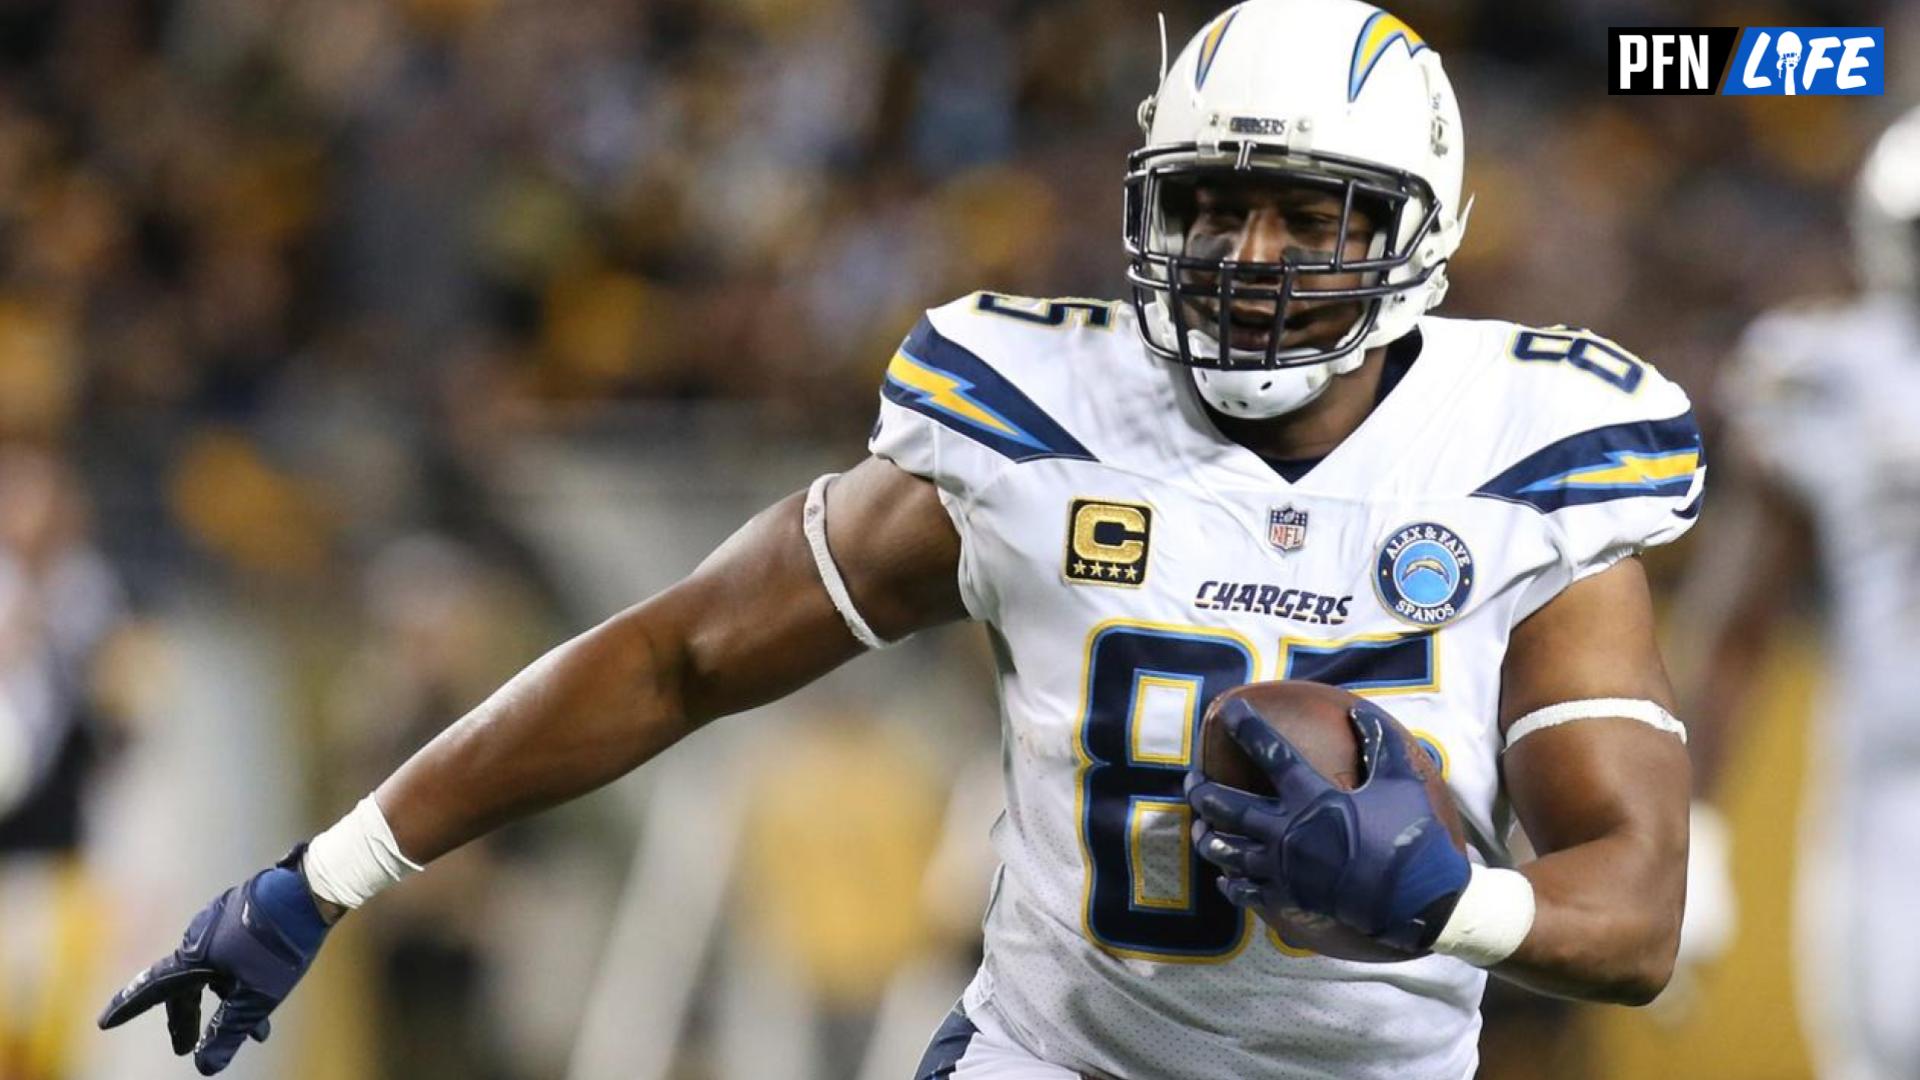 Los Angeles Chargers tight end Antonio Gates (85) runs after a catch against the Pittsburgh Steelers.